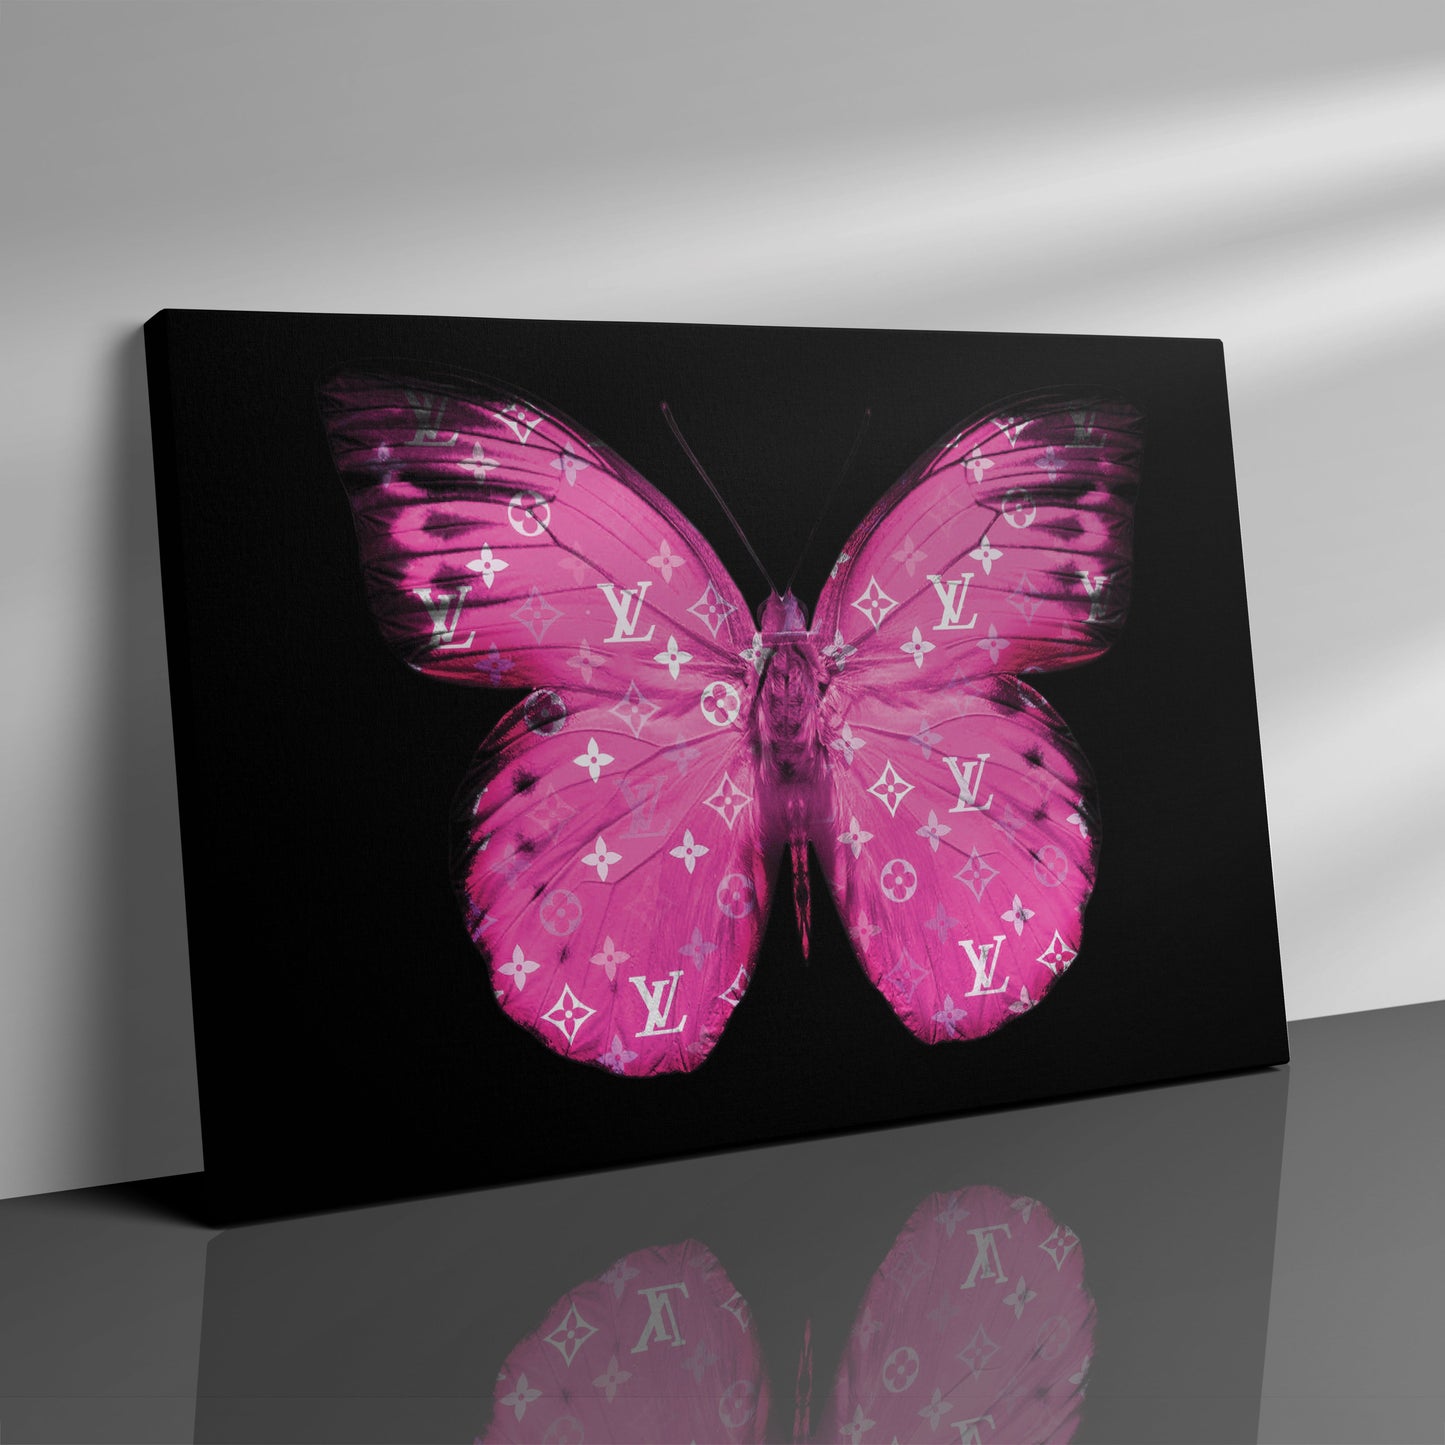 LV - Pink Butterfly - Canvas